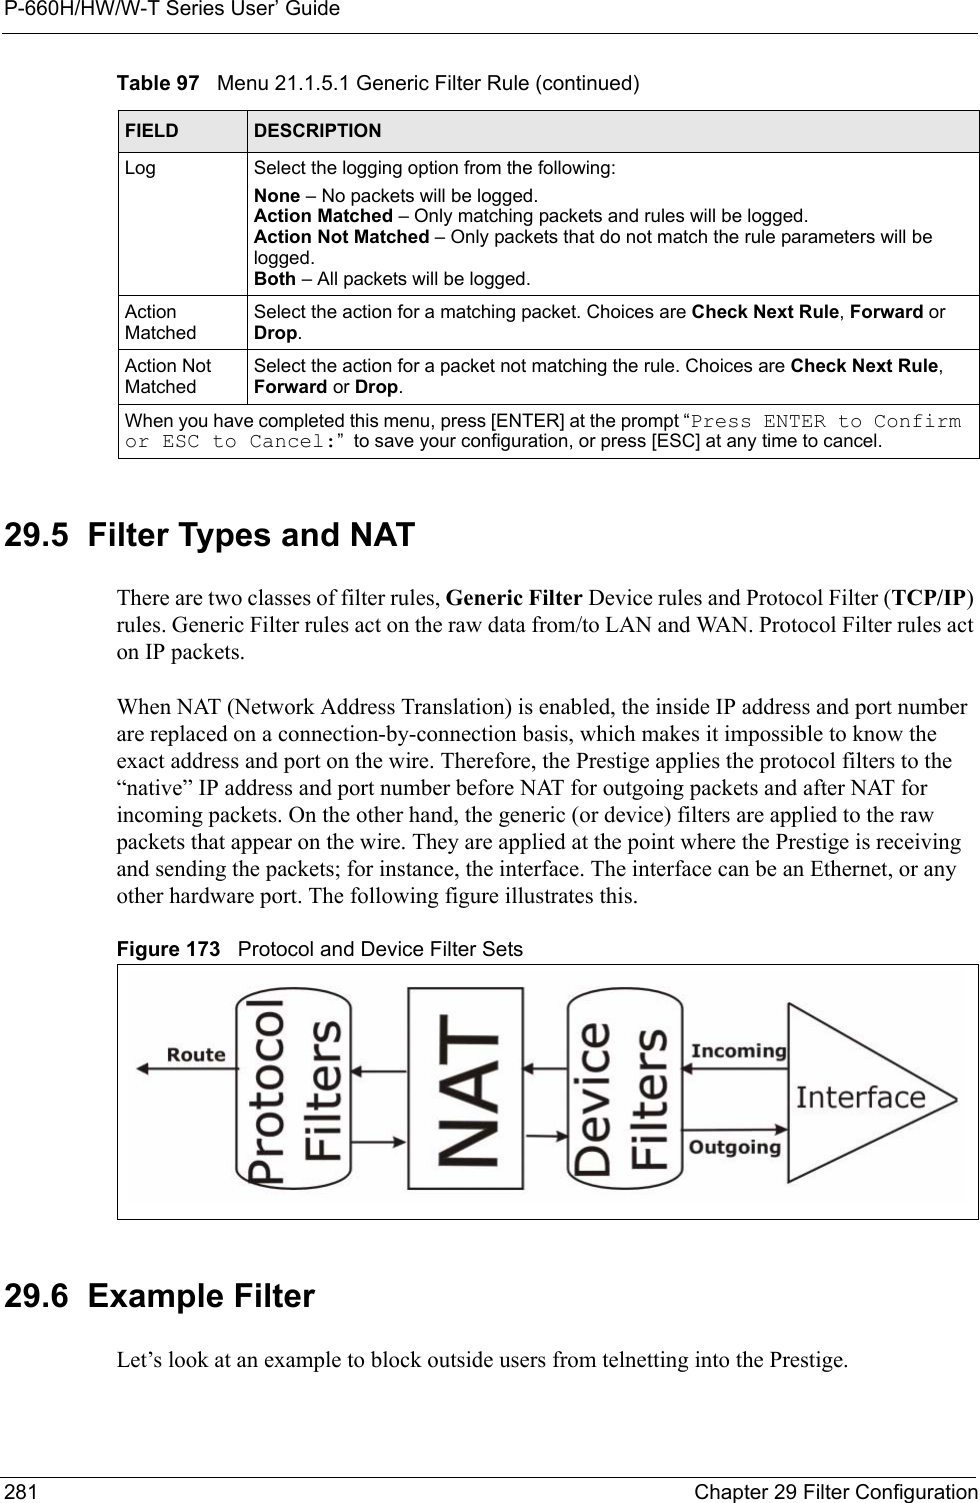 P-660H/HW/W-T Series User’ Guide281 Chapter 29 Filter Configuration29.5  Filter Types and NAT There are two classes of filter rules, Generic Filter Device rules and Protocol Filter (TCP/IP) rules. Generic Filter rules act on the raw data from/to LAN and WAN. Protocol Filter rules act on IP packets.When NAT (Network Address Translation) is enabled, the inside IP address and port number are replaced on a connection-by-connection basis, which makes it impossible to know the exact address and port on the wire. Therefore, the Prestige applies the protocol filters to the “native” IP address and port number before NAT for outgoing packets and after NAT for incoming packets. On the other hand, the generic (or device) filters are applied to the raw packets that appear on the wire. They are applied at the point where the Prestige is receiving and sending the packets; for instance, the interface. The interface can be an Ethernet, or any other hardware port. The following figure illustrates this.Figure 173   Protocol and Device Filter Sets29.6  Example FilterLet’s look at an example to block outside users from telnetting into the Prestige. Log Select the logging option from the following:None – No packets will be logged.Action Matched – Only matching packets and rules will be logged.Action Not Matched – Only packets that do not match the rule parameters will be logged.Both – All packets will be logged.Action MatchedSelect the action for a matching packet. Choices are Check Next Rule, Forward or Drop.Action Not MatchedSelect the action for a packet not matching the rule. Choices are Check Next Rule, Forward or Drop.When you have completed this menu, press [ENTER] at the prompt “Press ENTER to Confirm or ESC to Cancel:”  to save your configuration, or press [ESC] at any time to cancel.Table 97   Menu 21.1.5.1 Generic Filter Rule (continued)FIELD DESCRIPTION